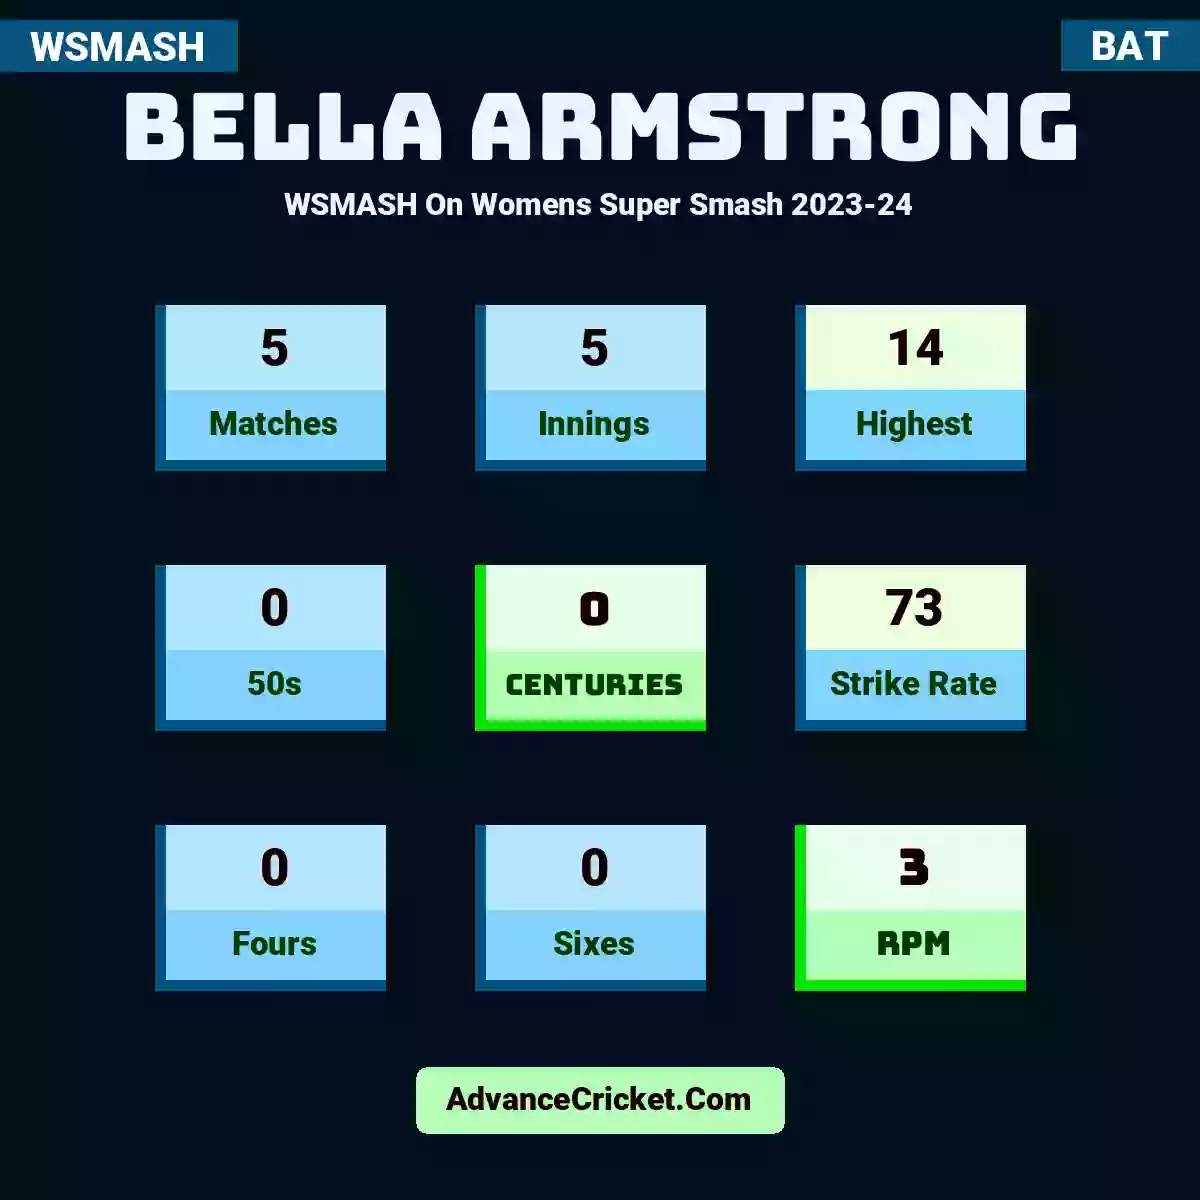 Bella Armstrong WSMASH  On Womens Super Smash 2023-24, Bella Armstrong played 5 matches, scored 14 runs as highest, 0 half-centuries, and 0 centuries, with a strike rate of 73. B.Armstrong hit 0 fours and 0 sixes, with an RPM of 3.